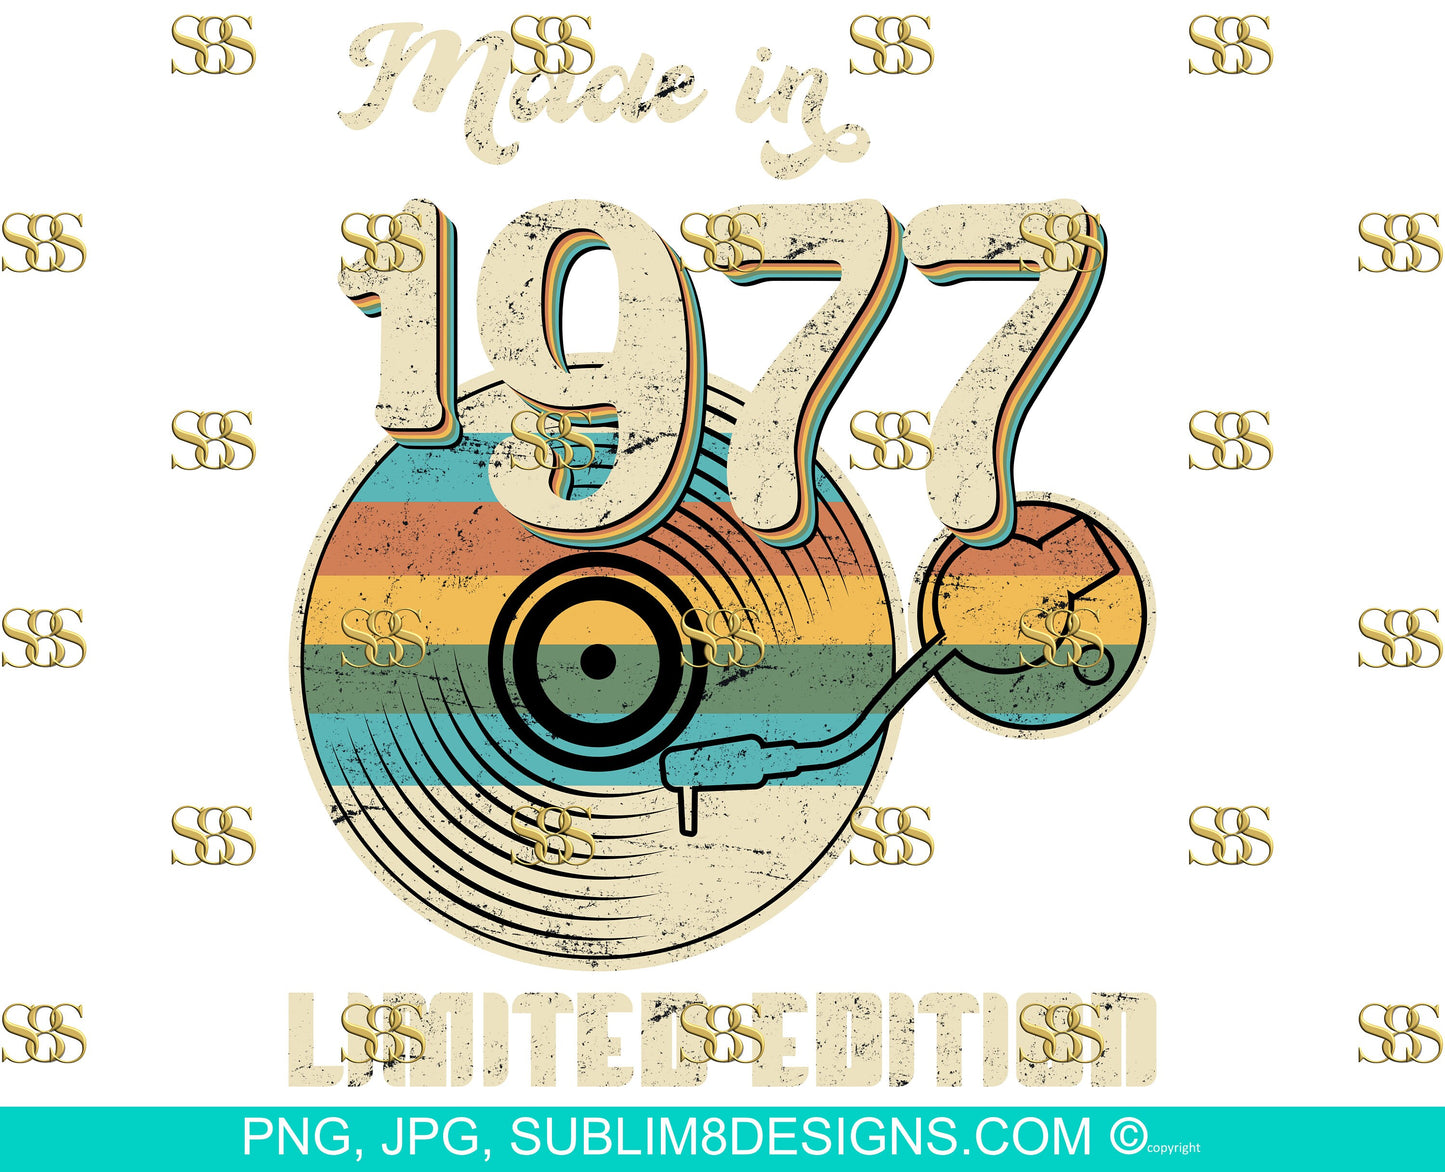 Personalized Made In 1977 Limited Edition Record Player Sublimation Design PNG and JPG ONLY